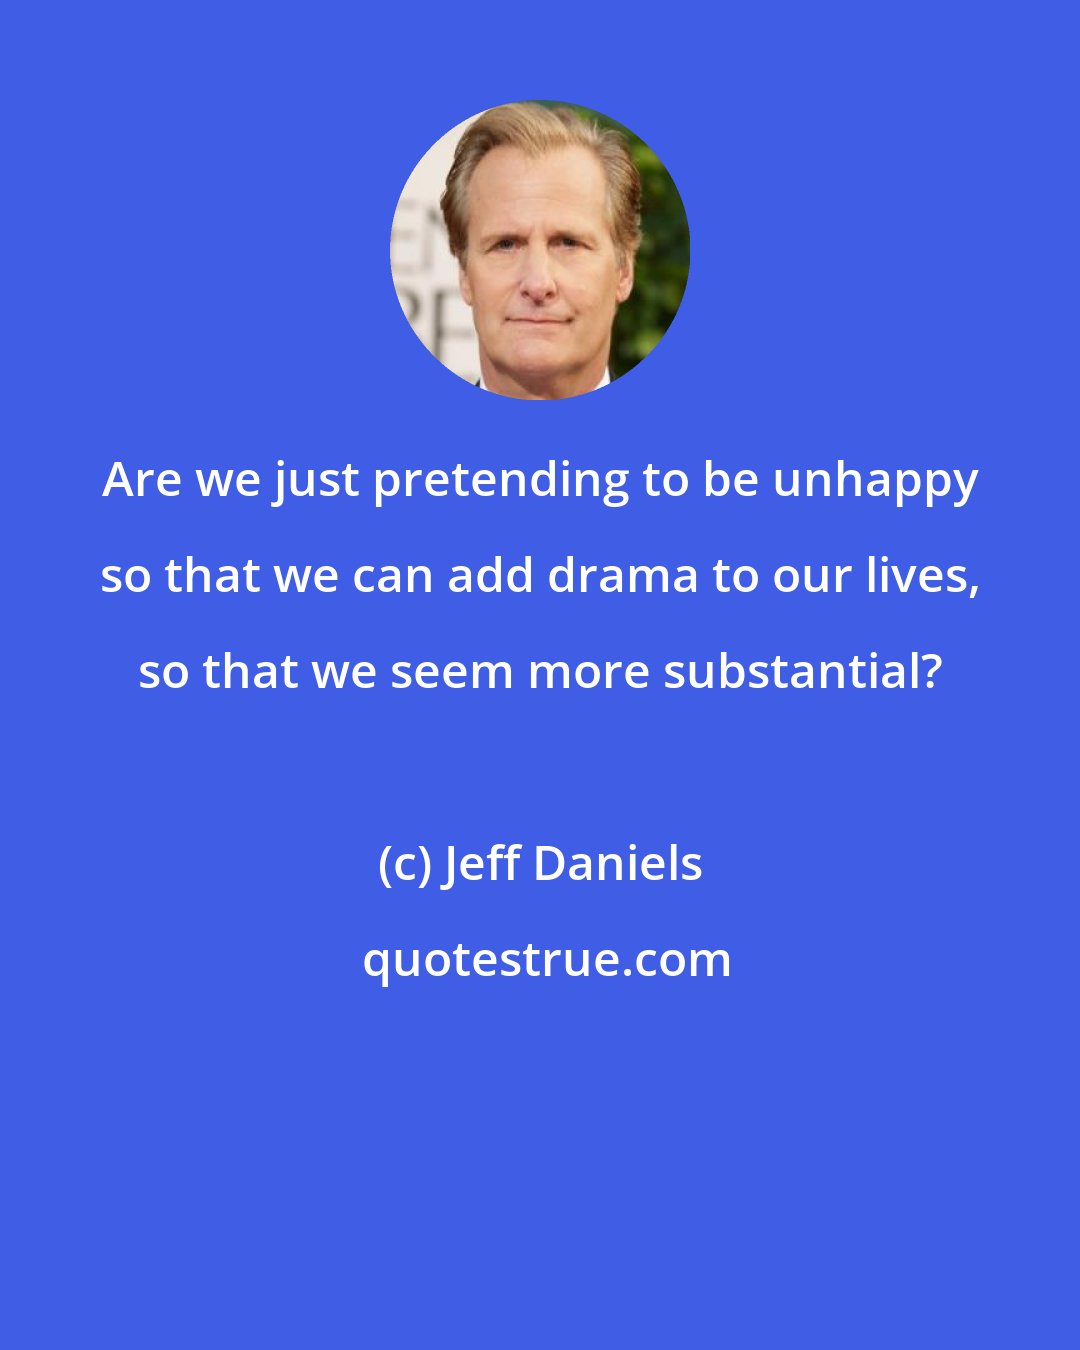 Jeff Daniels: Are we just pretending to be unhappy so that we can add drama to our lives, so that we seem more substantial?